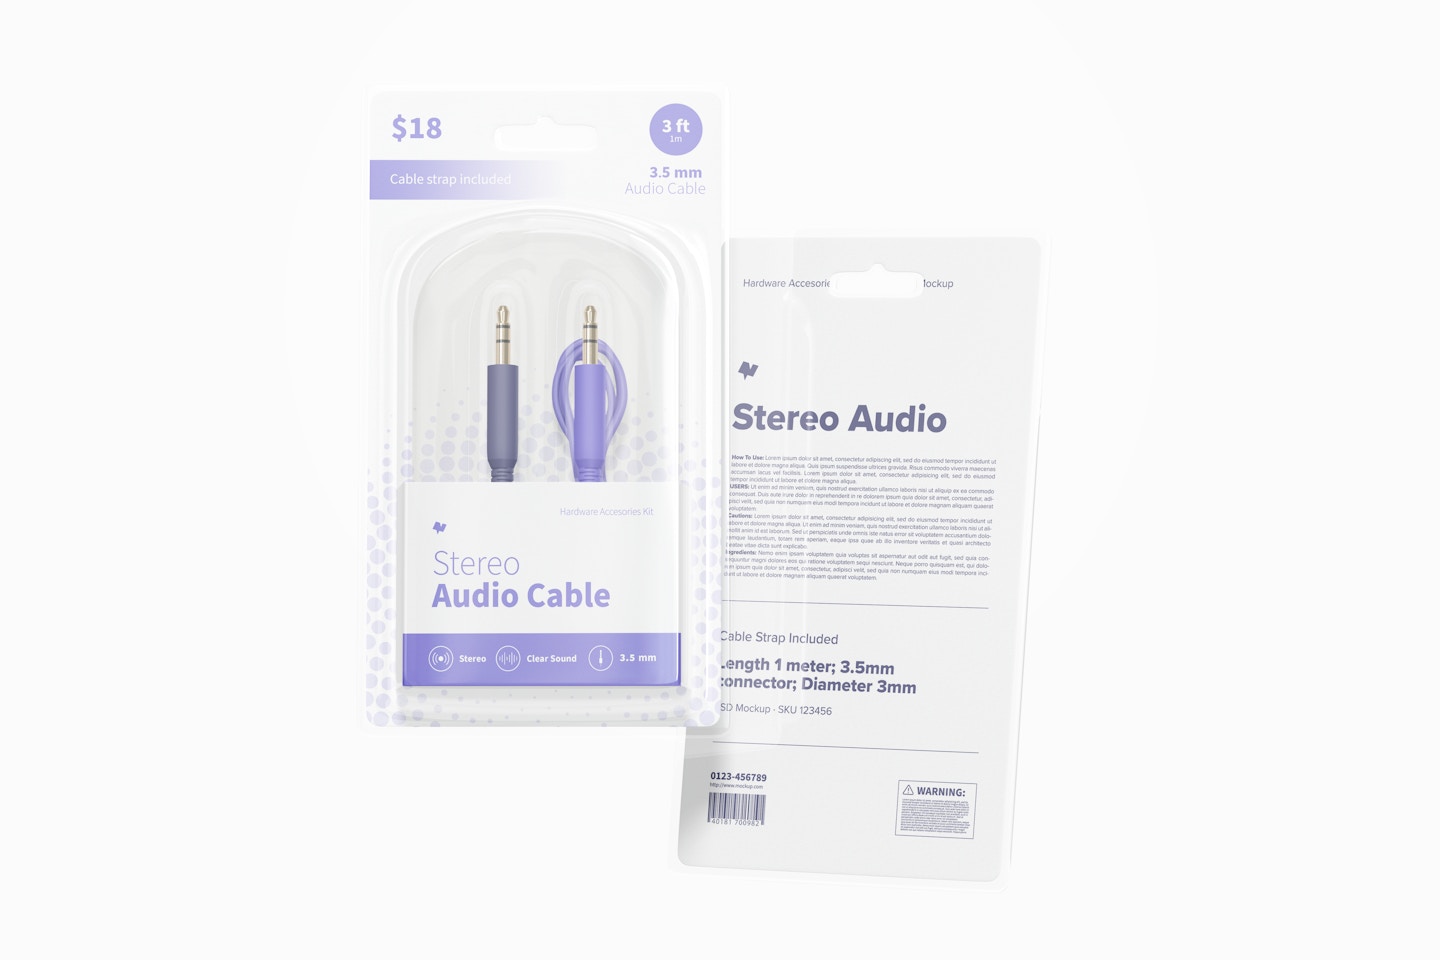 Stereo Audio Cable Mockup, Floating